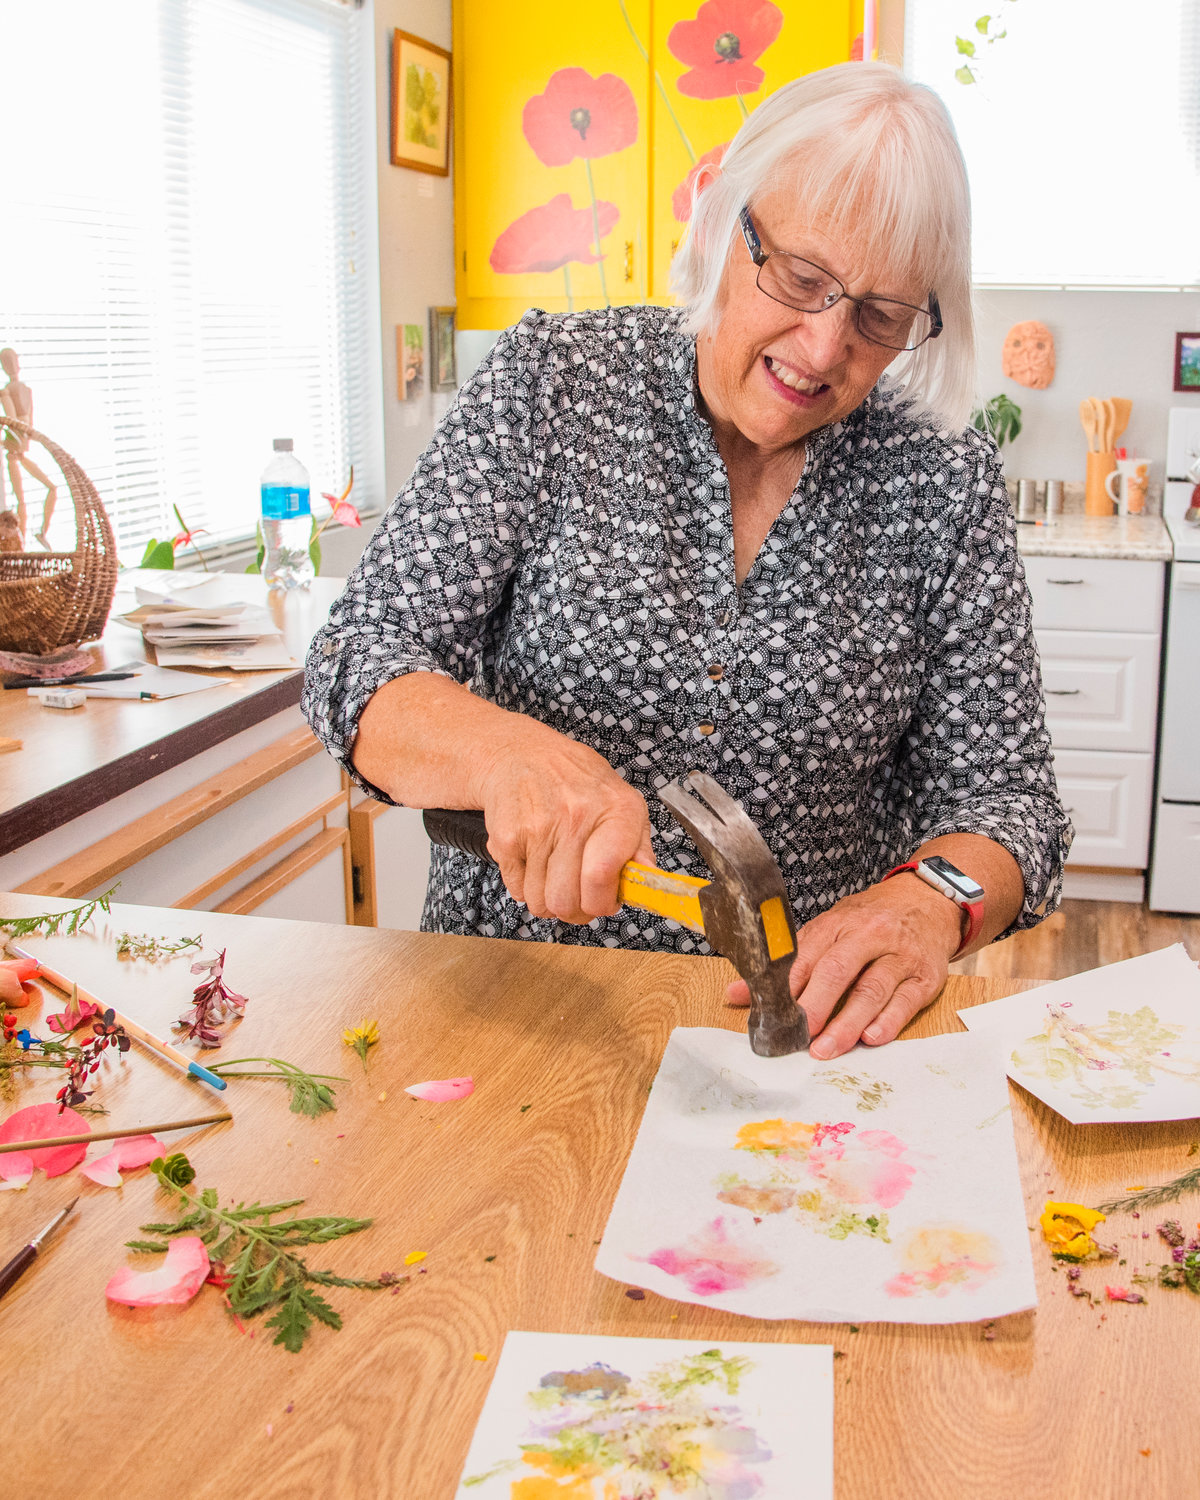 Barbara Burres pounds flowers against a table onto a canvas Tuesday afternoon in her Cinebar Art Studio.